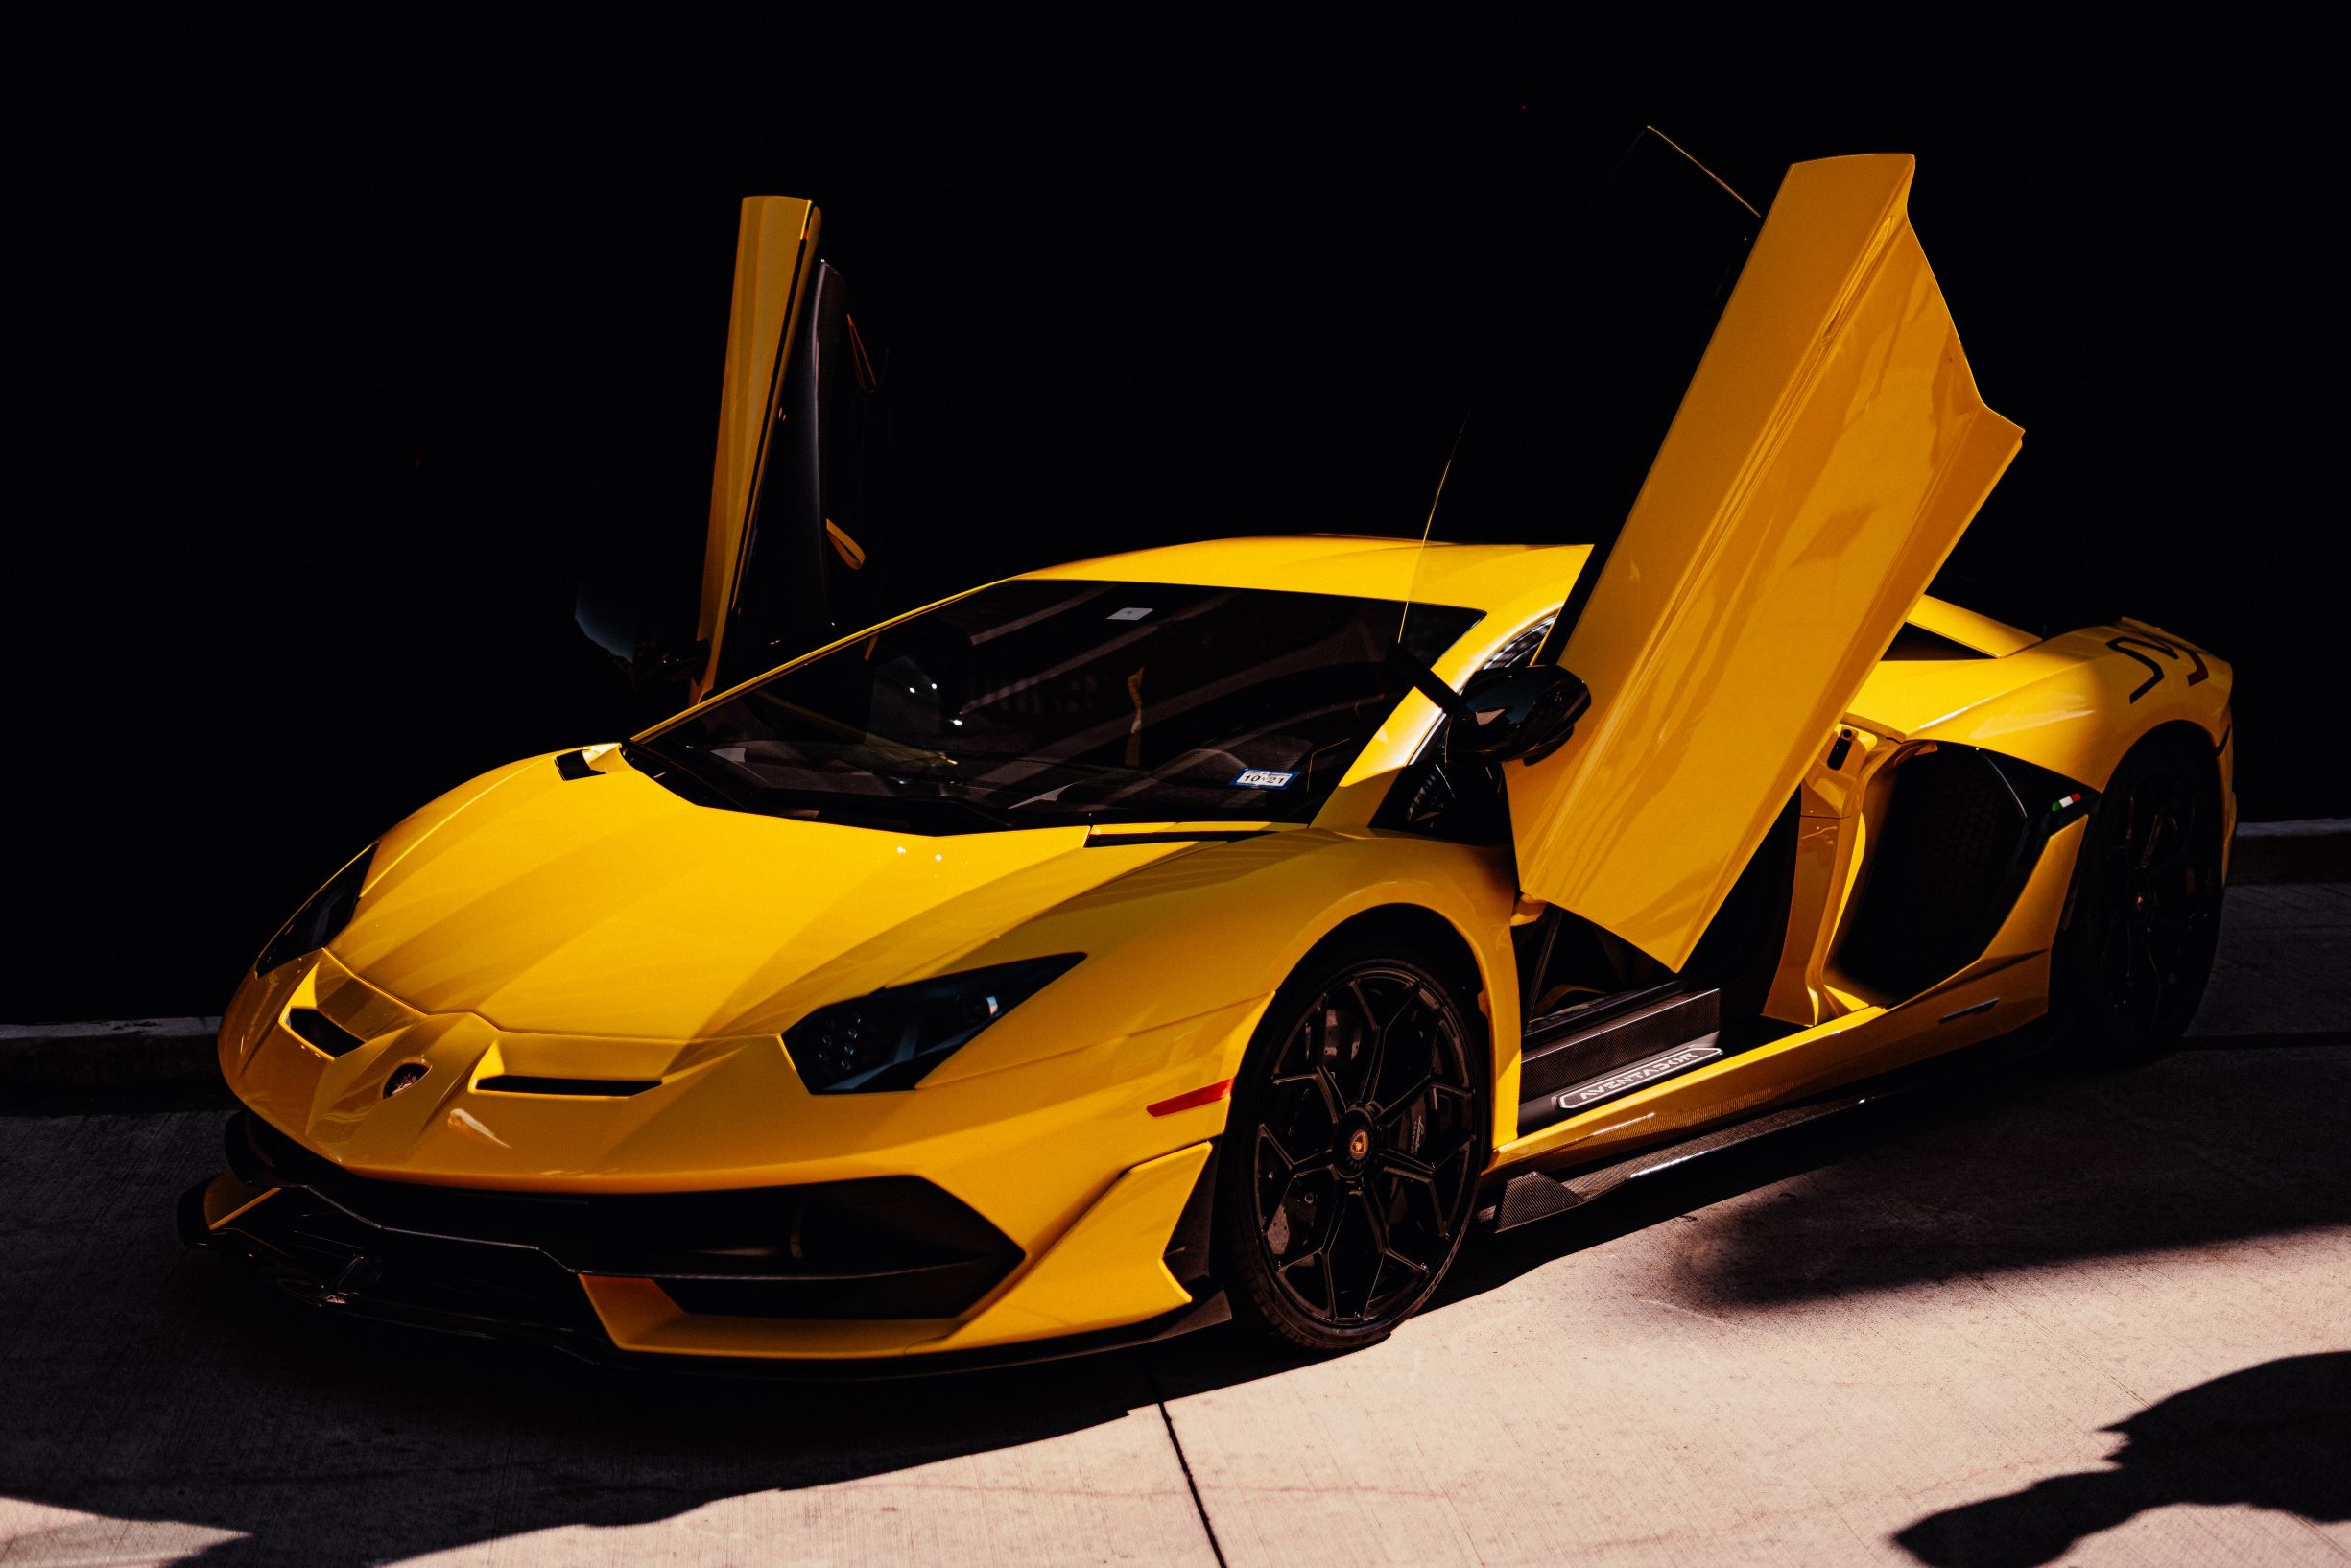 An image of a yellow supercar with its doors up.